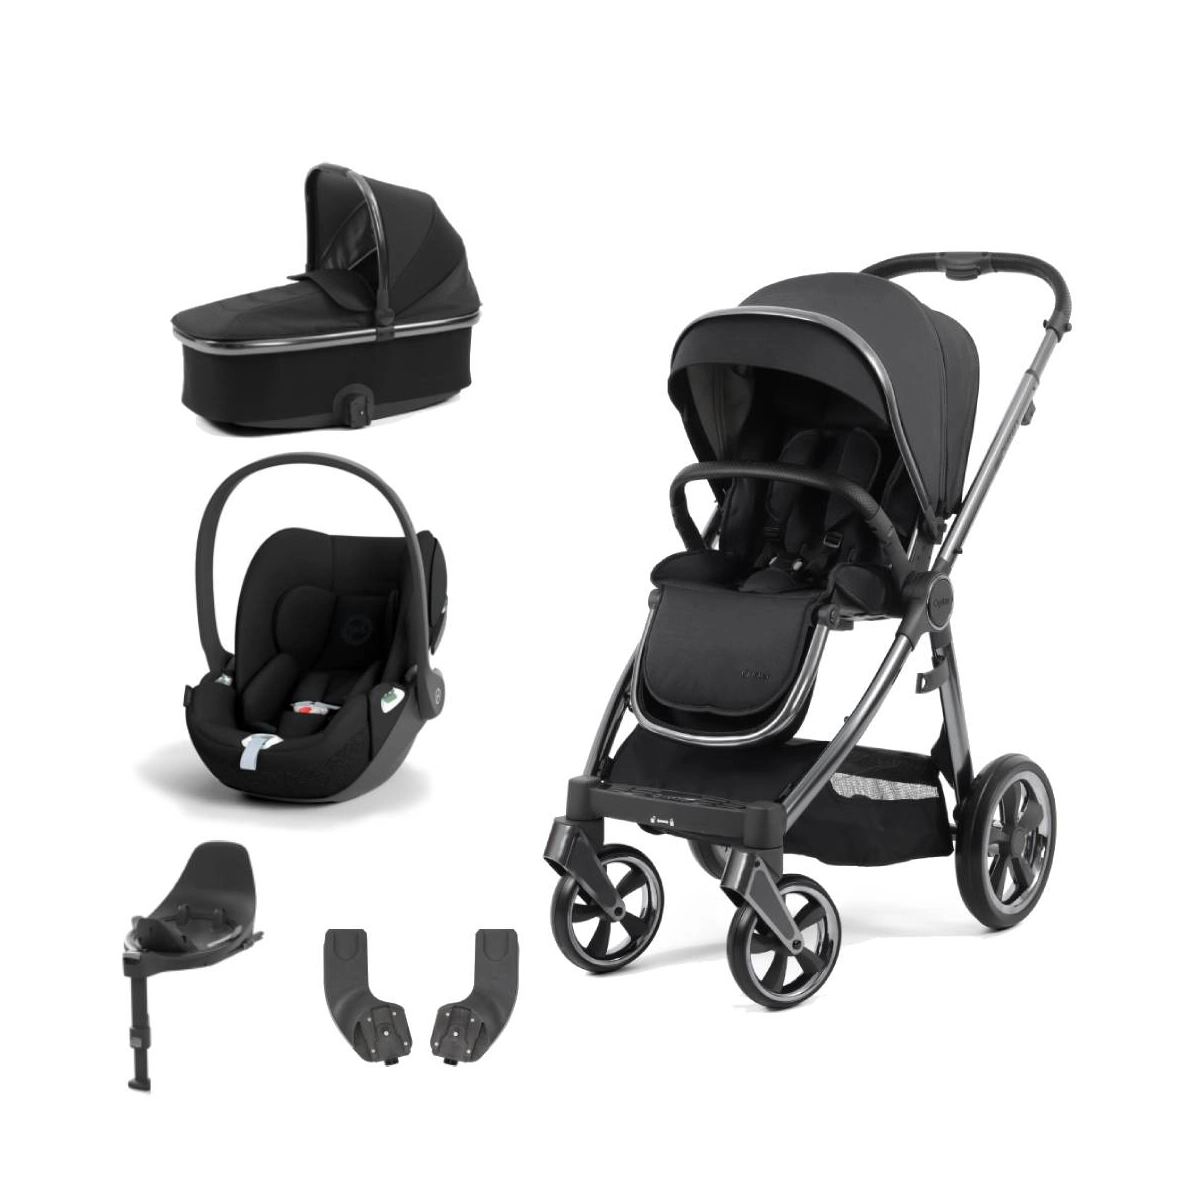 BabyStyle Oyster 3 Gun Metal Chassis Essential 5 Piece Bundle with Cybex Cloud T Car Seat & Base